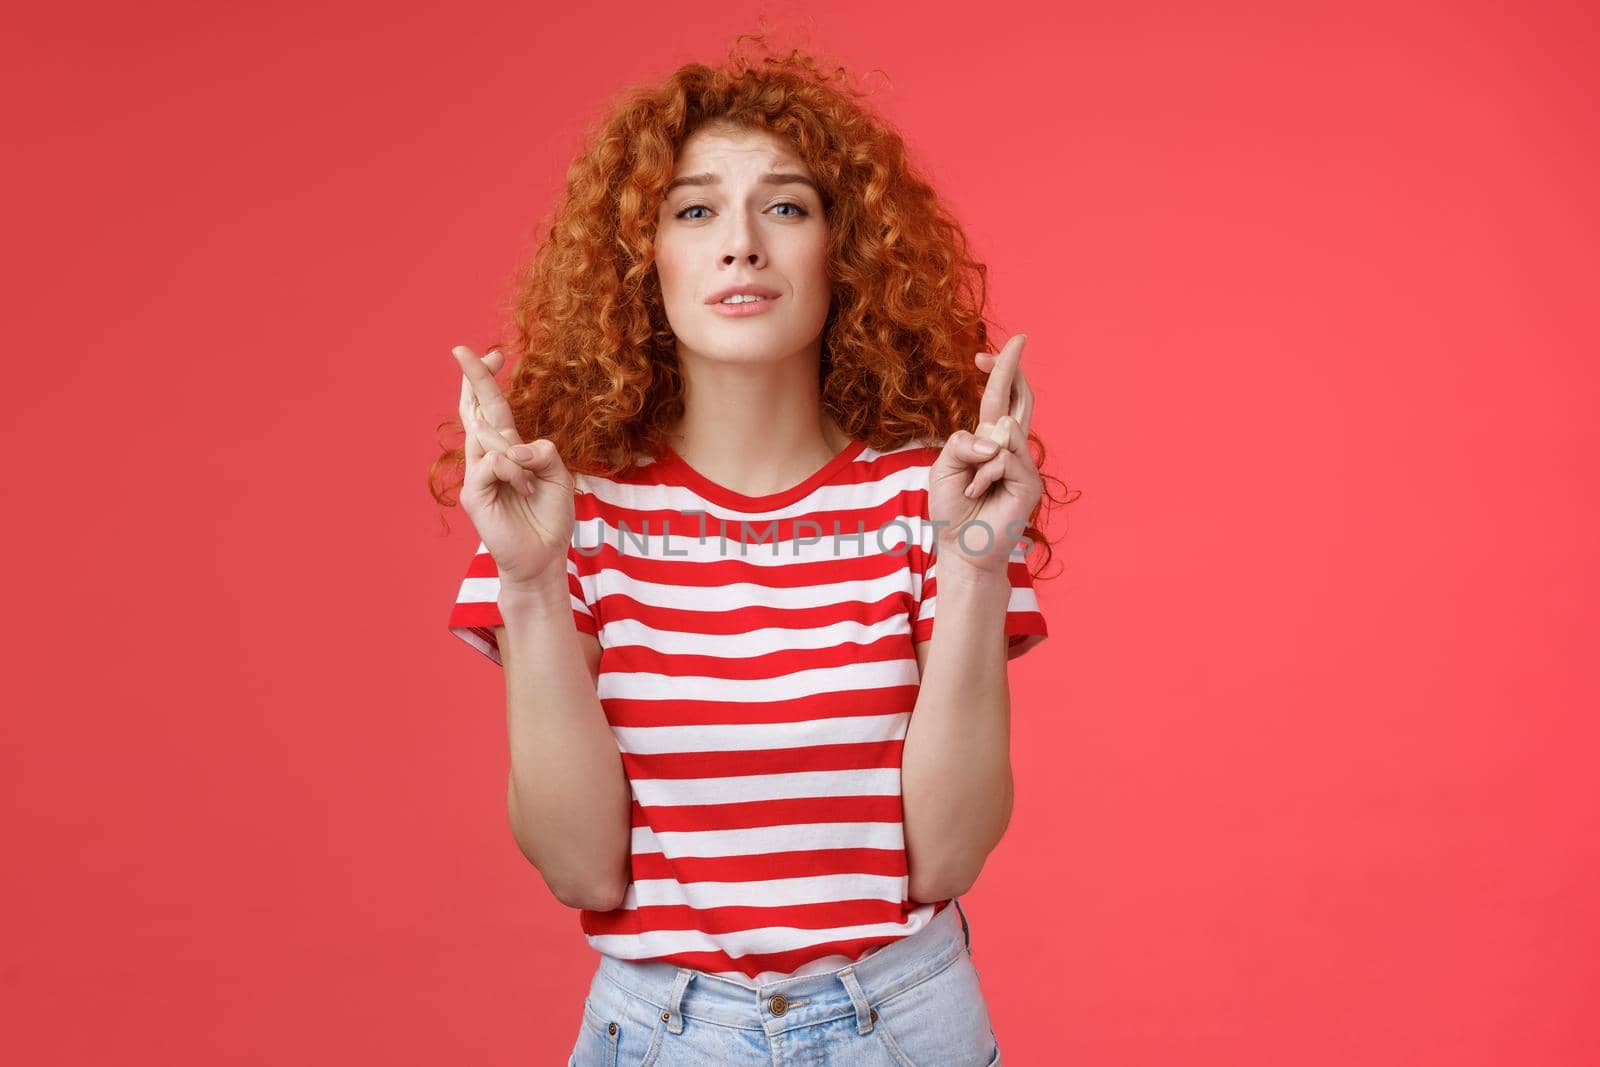 Nervous young silly timid cute redhead ginger girl anticipating hopeful results believe praying squinting intense worry to win cross fingers good luck wish come true red background.